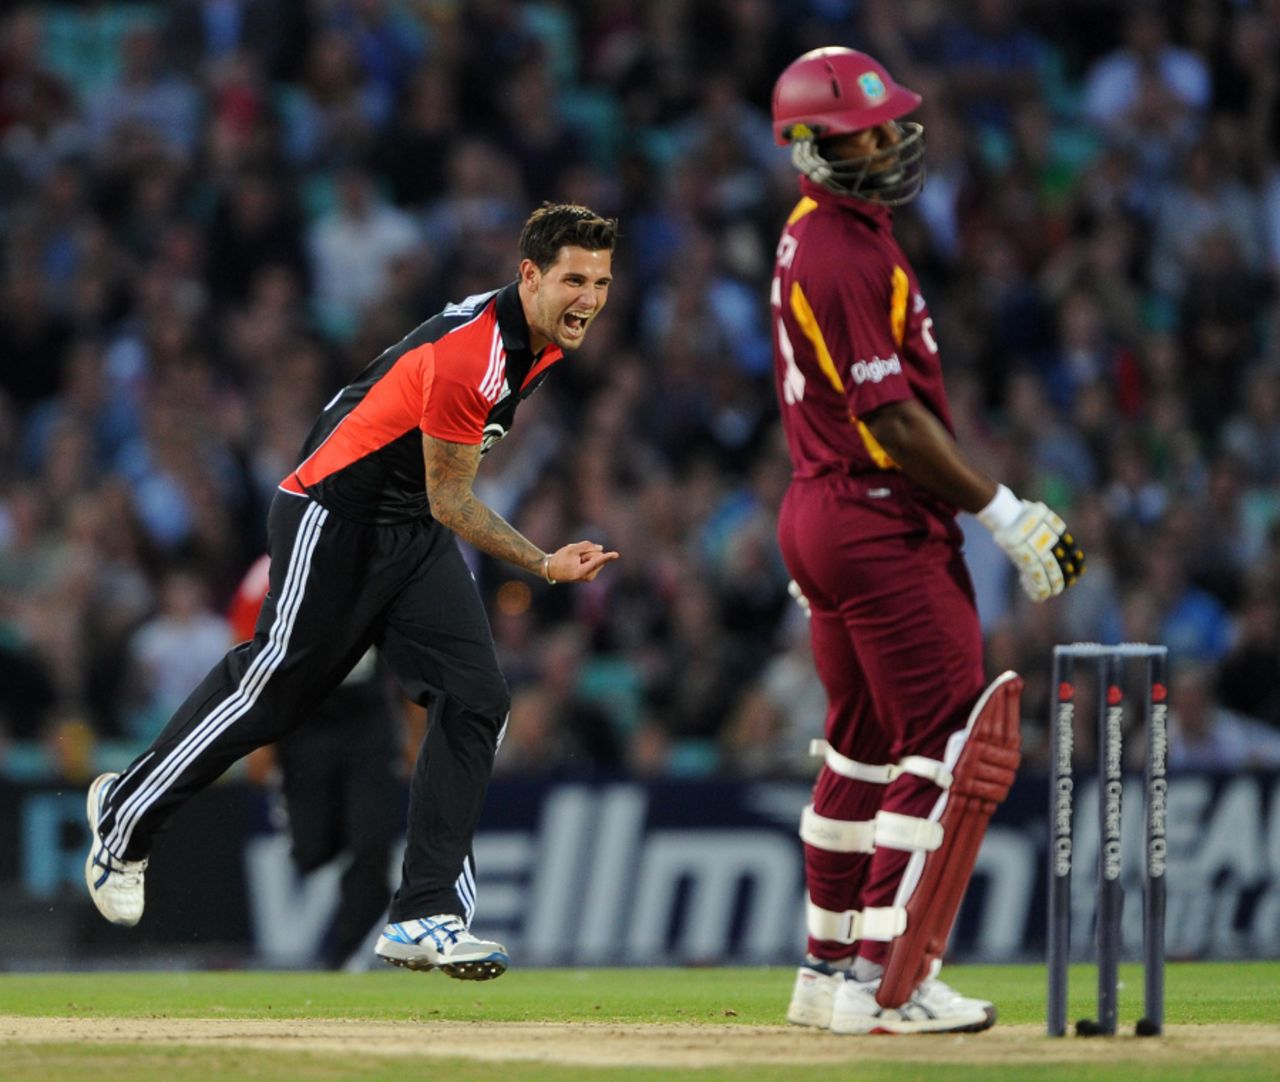 Jade Dernbach pinned Dwayne Smith in front of his stumps, England v West Indies, 2nd Twenty20, The Oval, September 25 2011